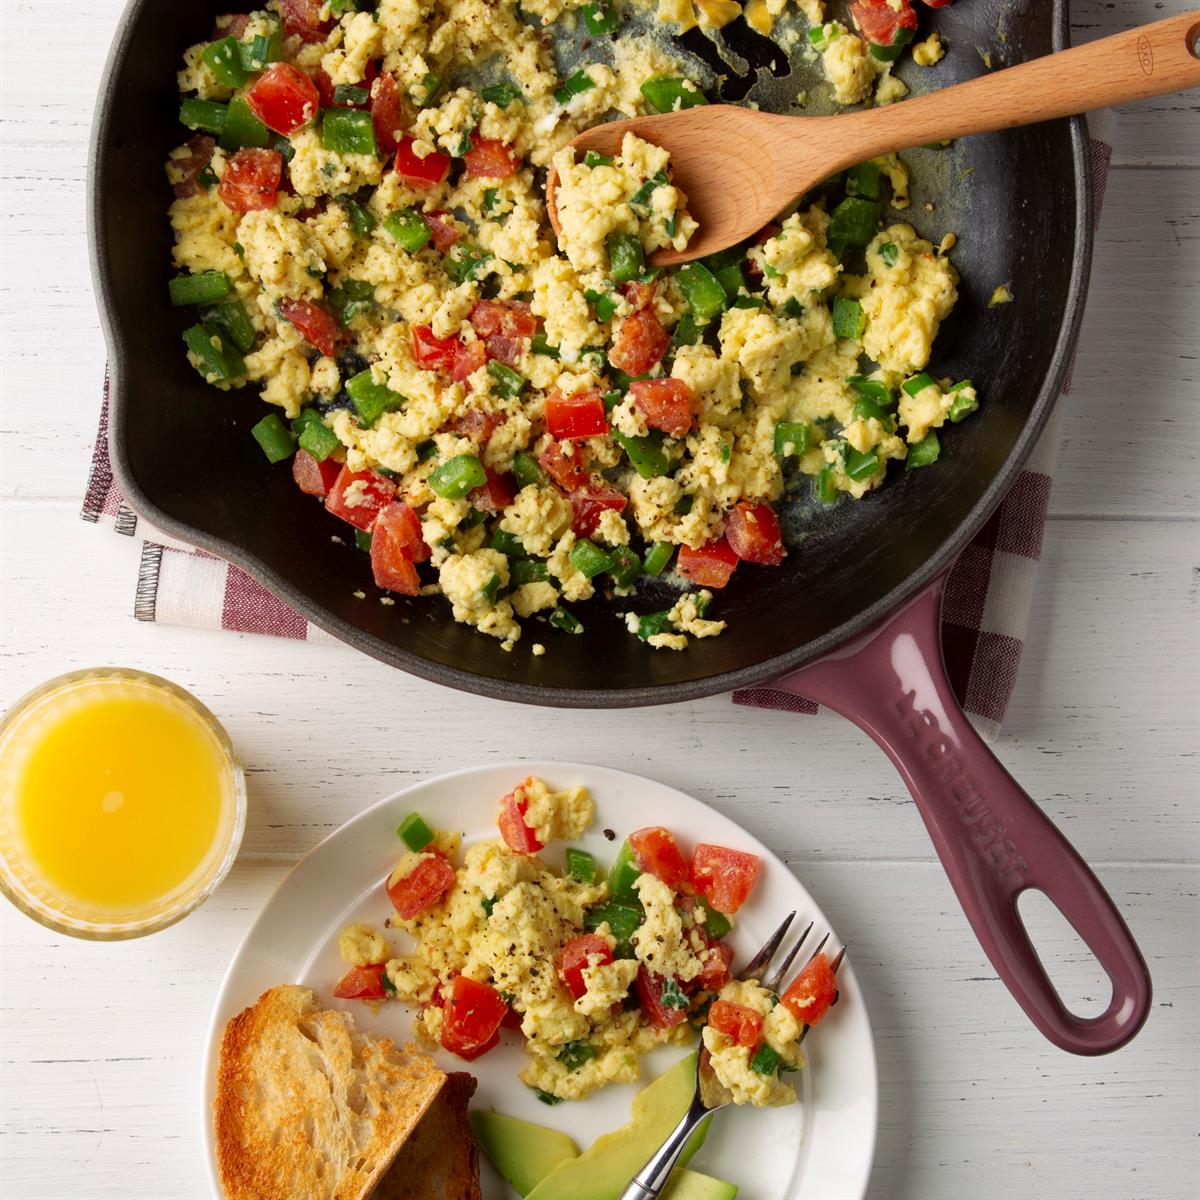 Scrambled Eggs with Vegetables Recipe: How to Make It